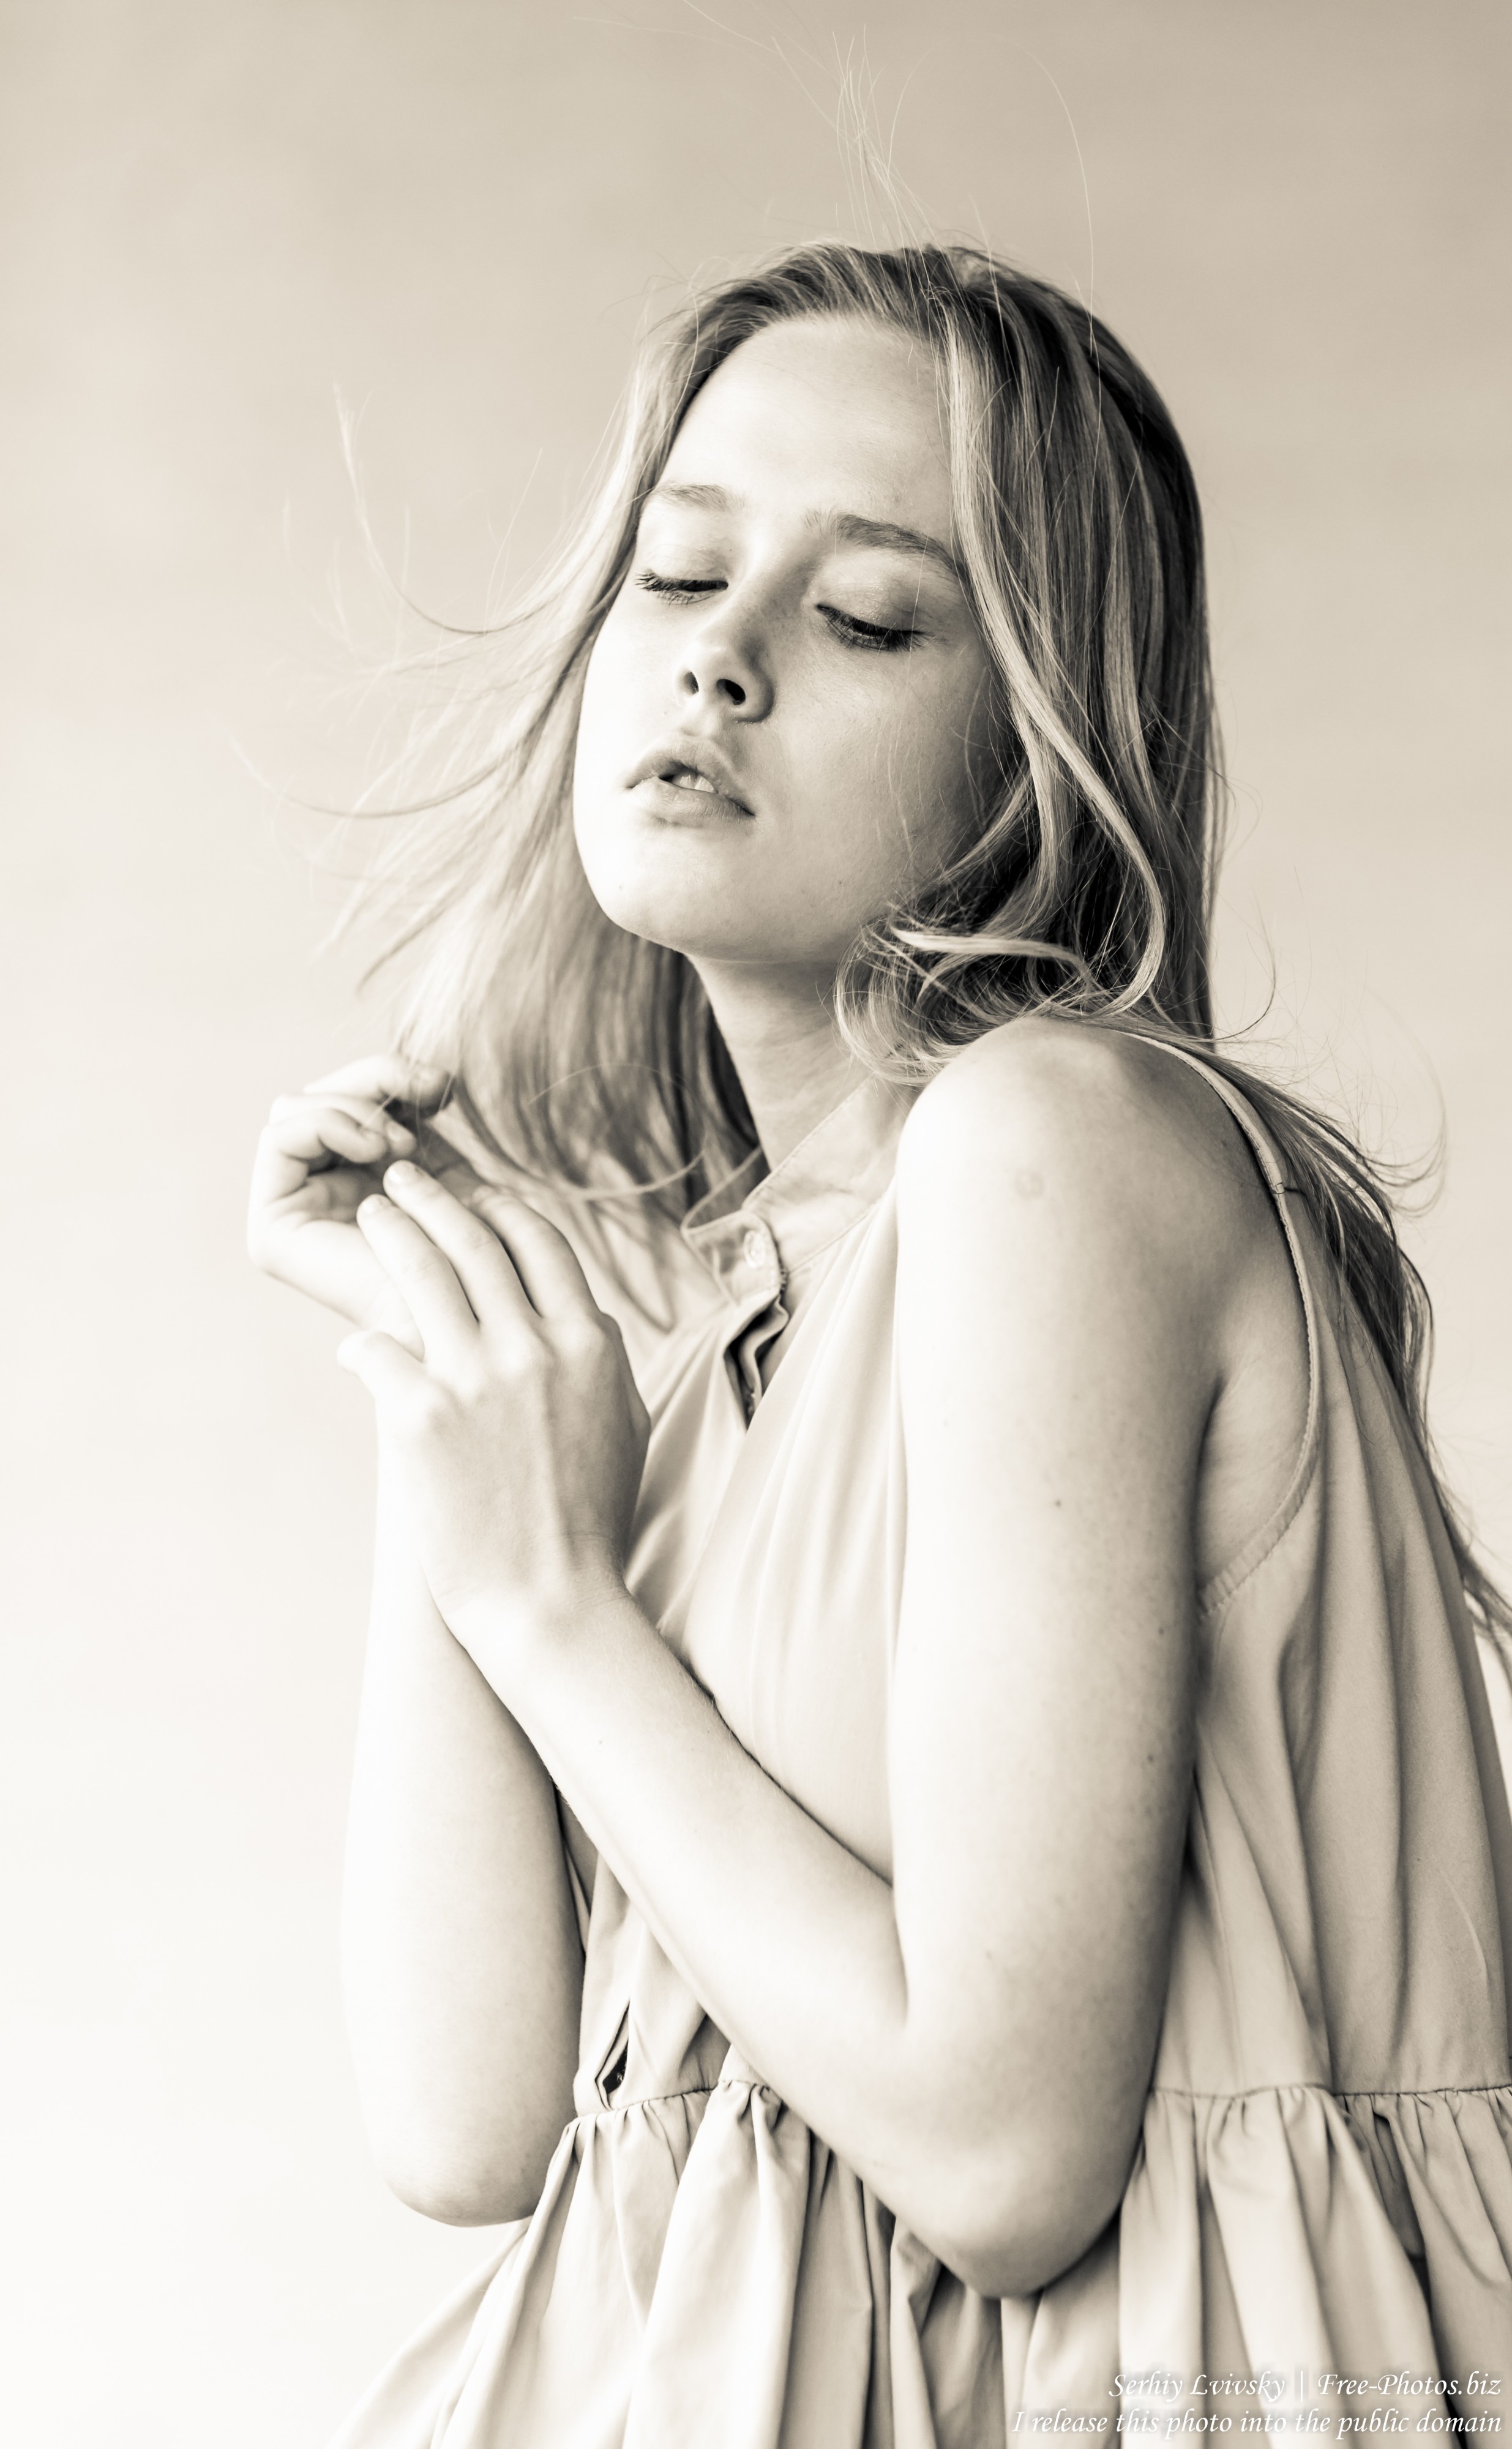 Ania - an 18-year-old natural blonde girl photographed in June 2019 by Serhiy Lvivsky, picture 18